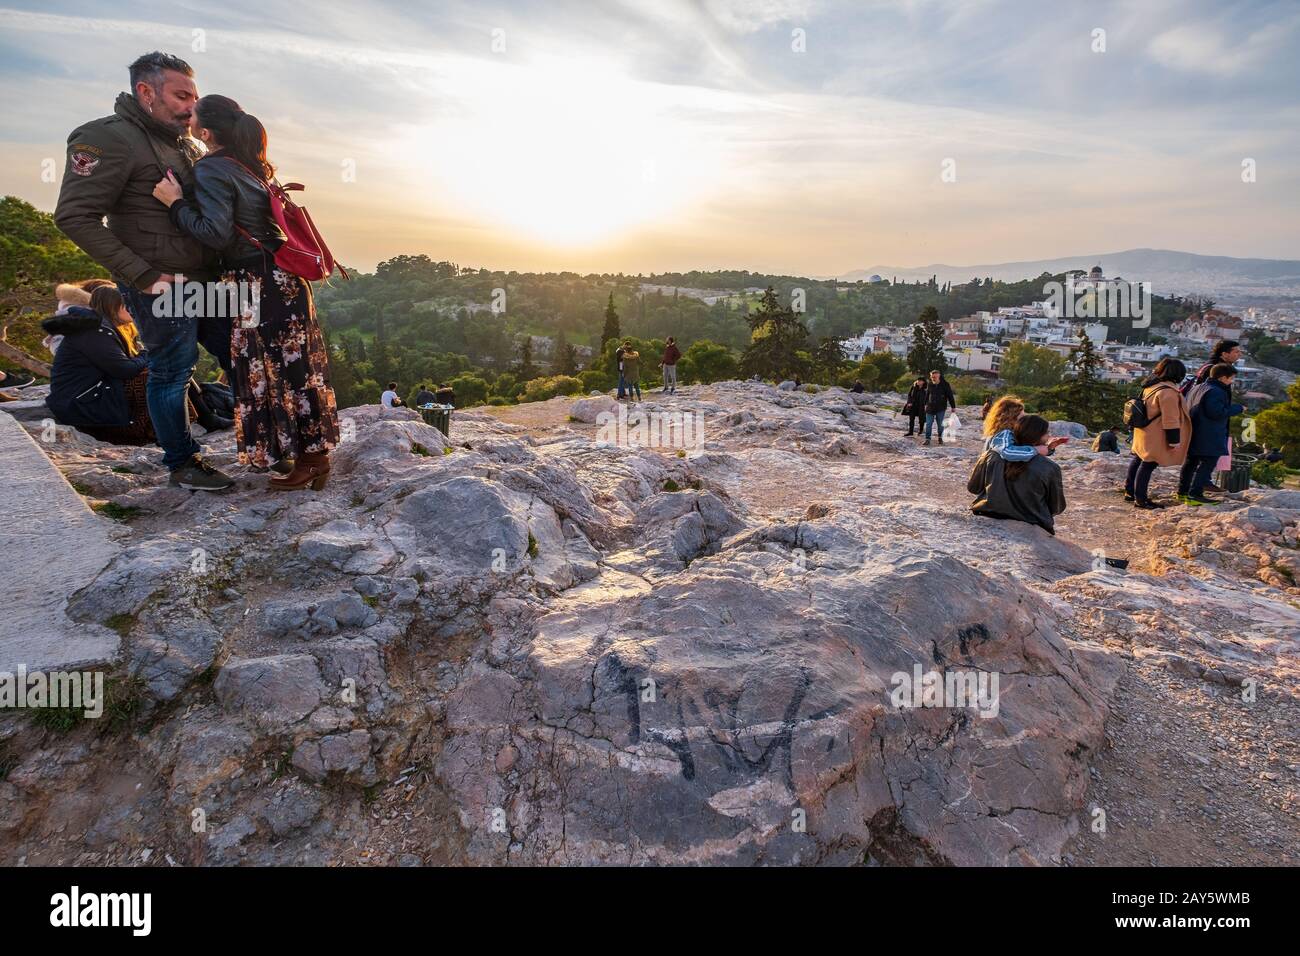 Athens, Greece - January 25, 2020: A couple of tourists are kissing against the romantic setting of a sunset on a hill across the Acropolis rock in At Stock Photo